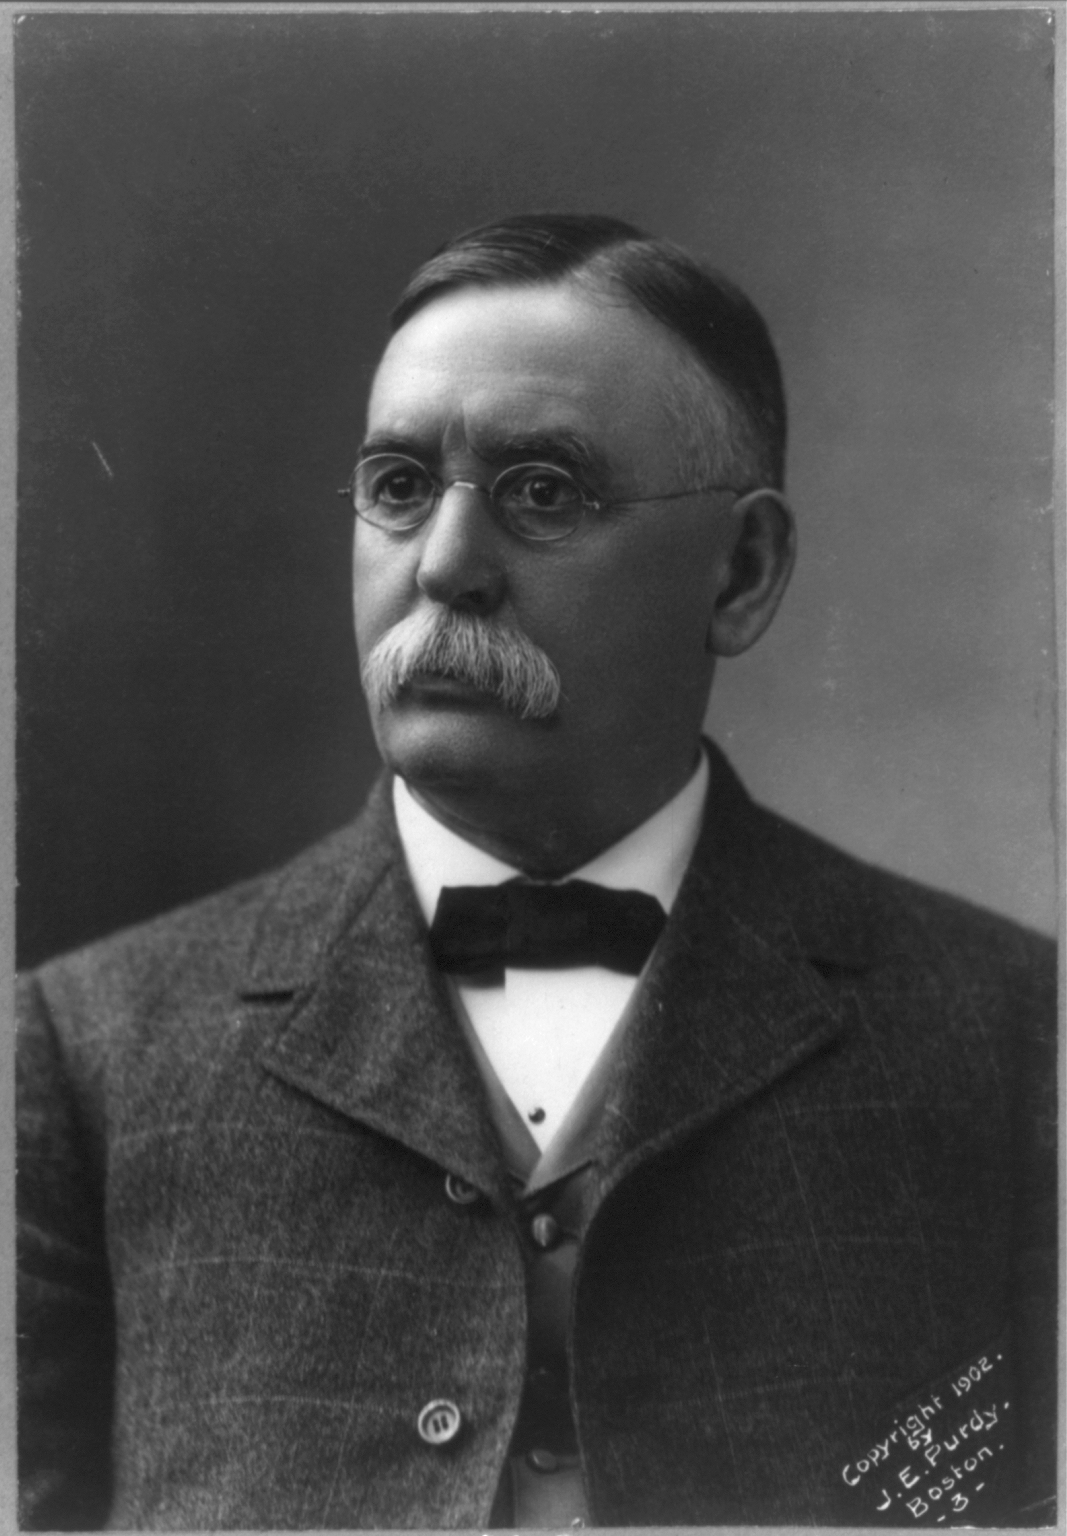 Thomas Patterson, publisher of the Denver Rocky Mountain News